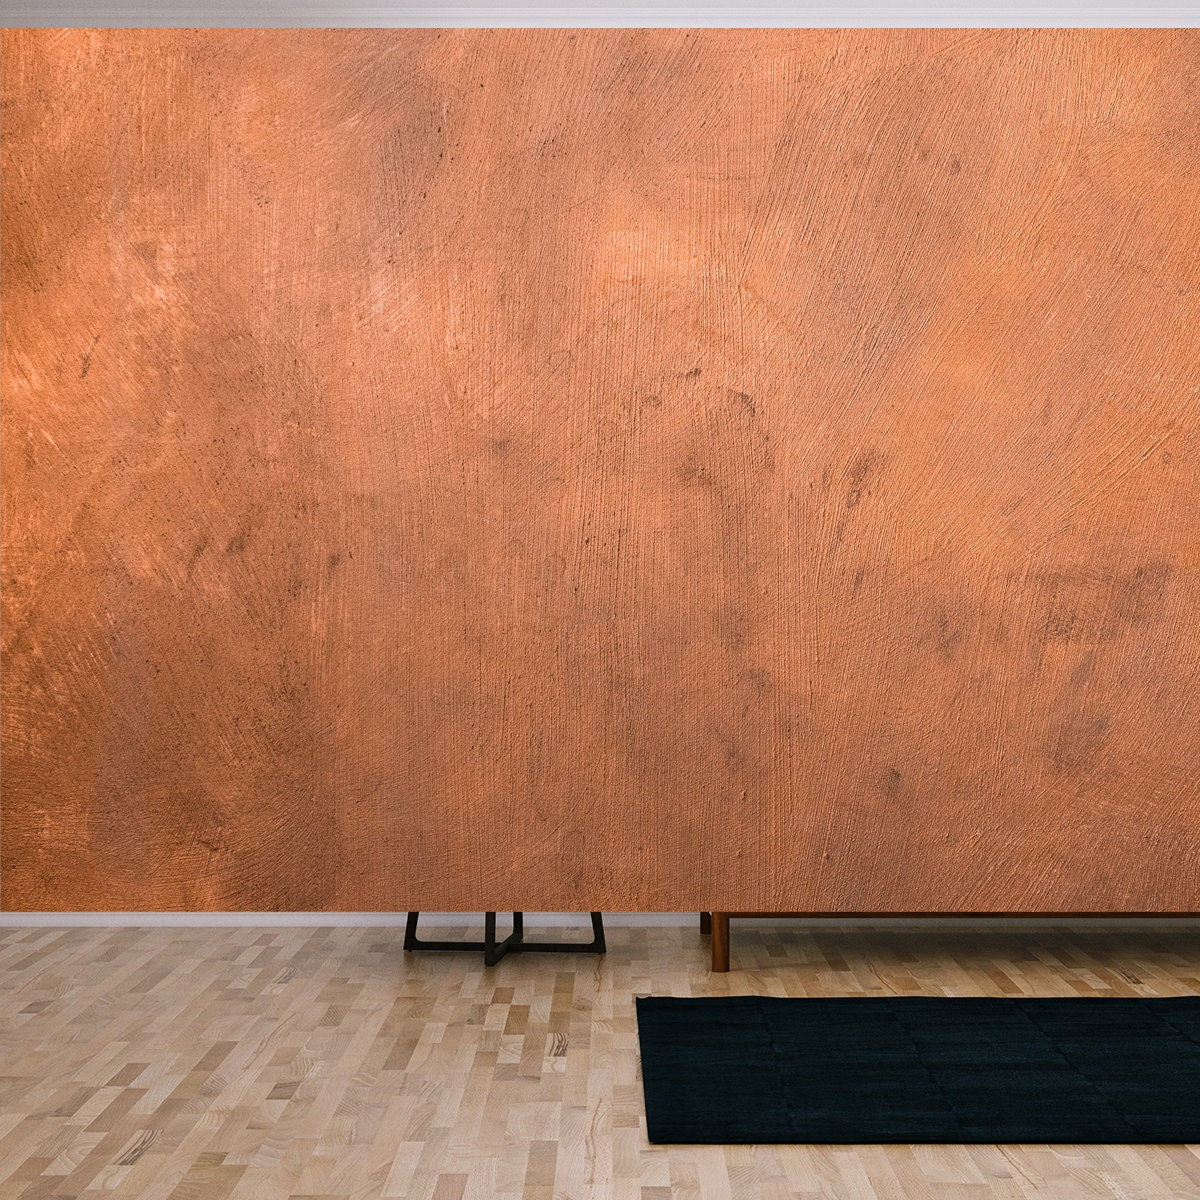 Copper Metallic Painted Surface Background Wallpaper Living Room Mural